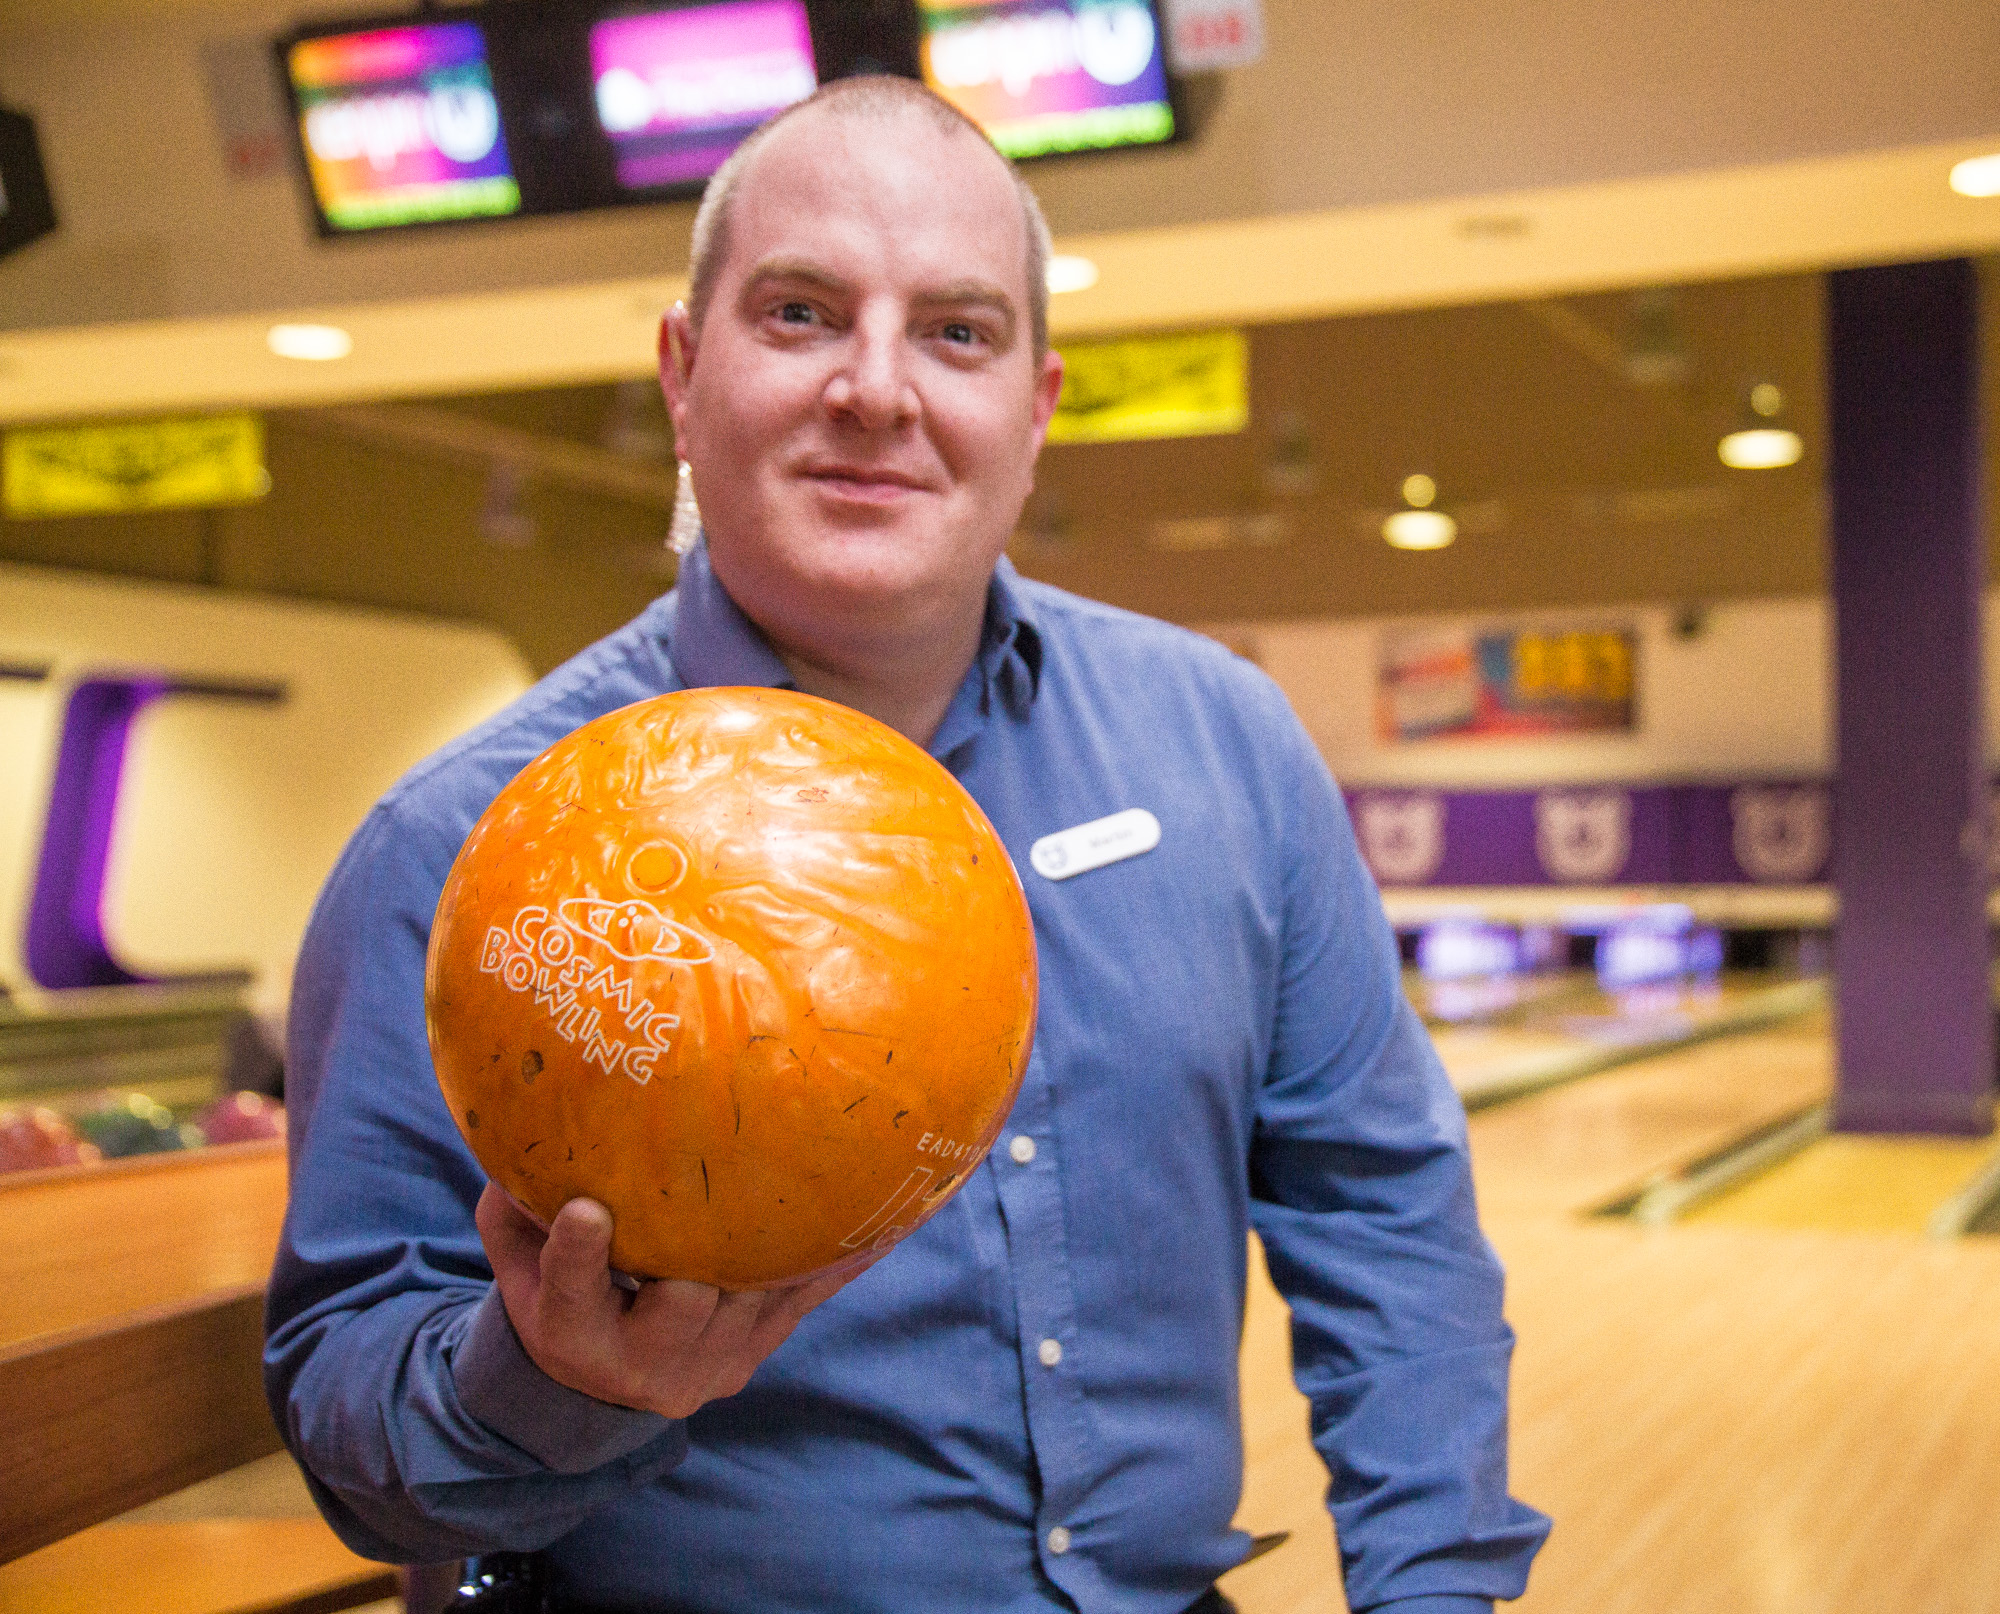 New bowling alley boss aims to strike it lucky for charity